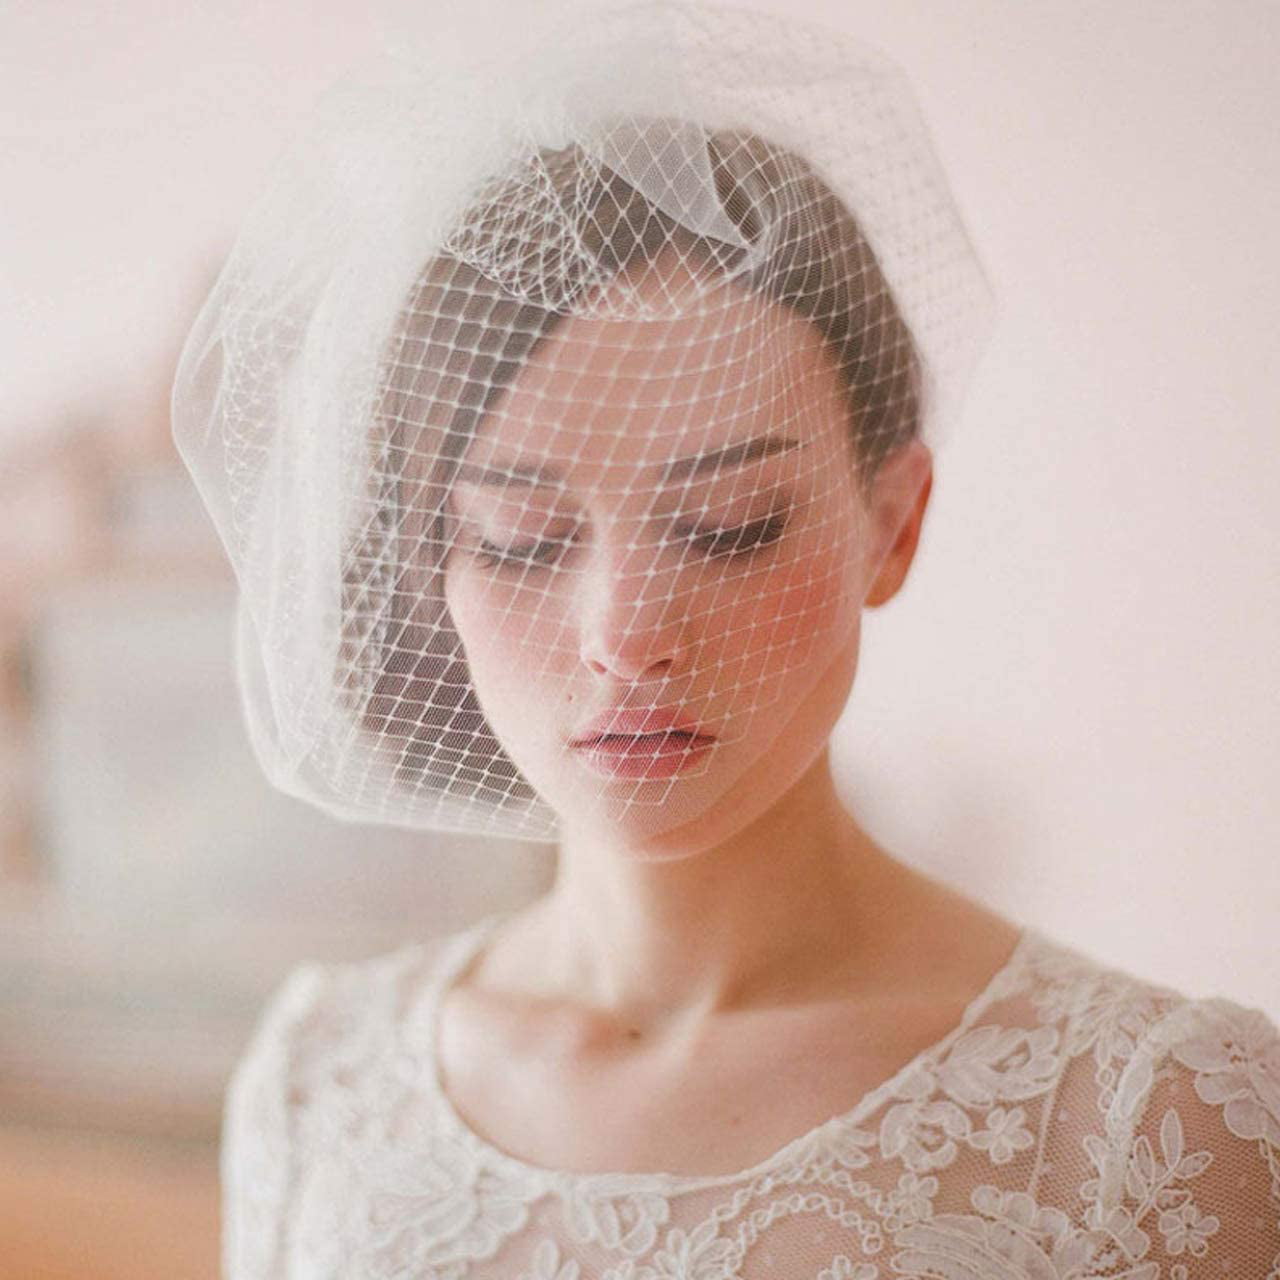 Mini Birdcage Veil with Dots (or Plain) - Style #217 White / Dots